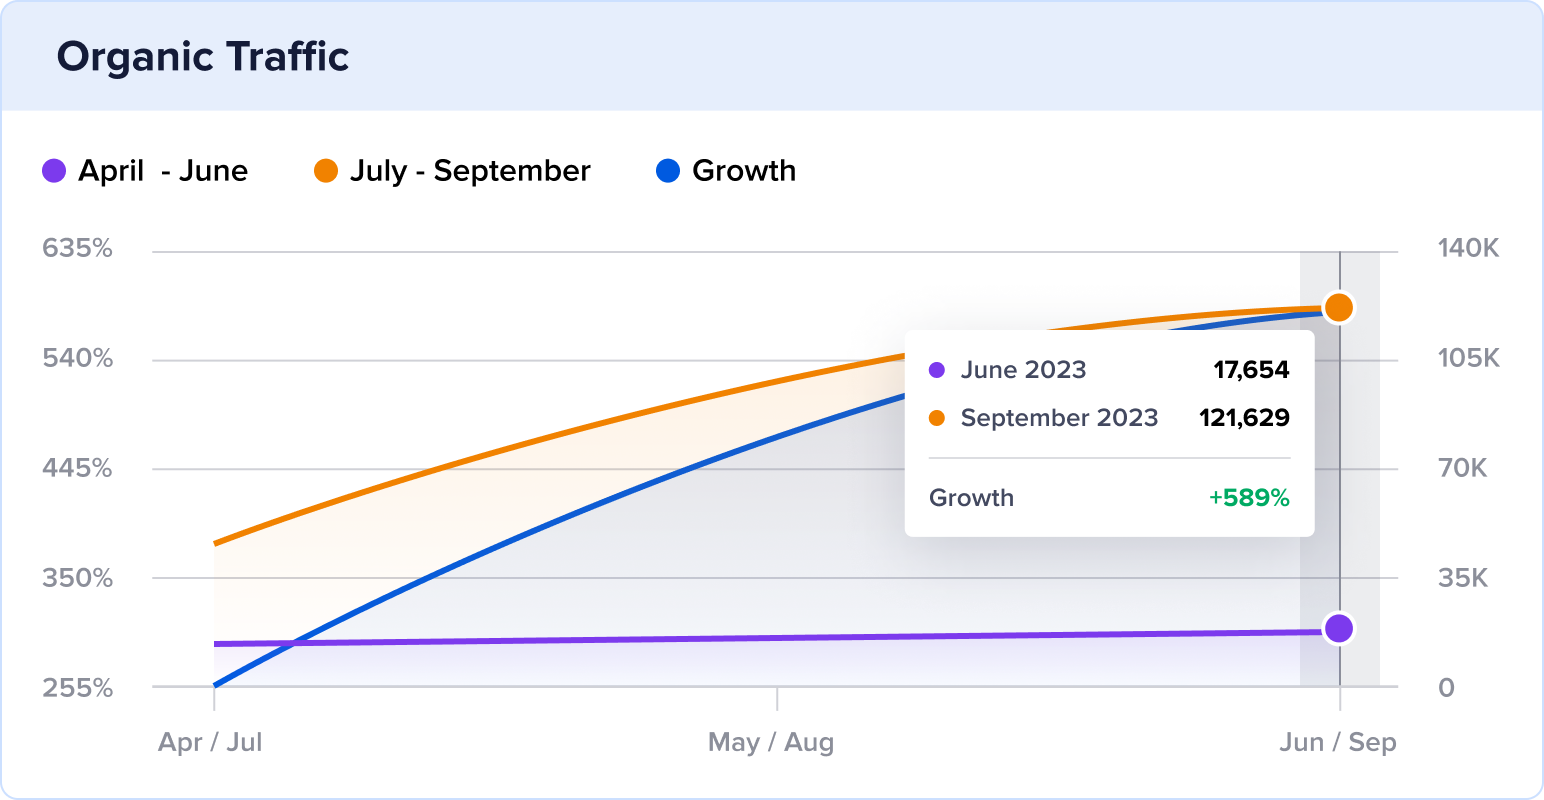 Organic traffic growth of meshki.co.uk over the past 3 months.